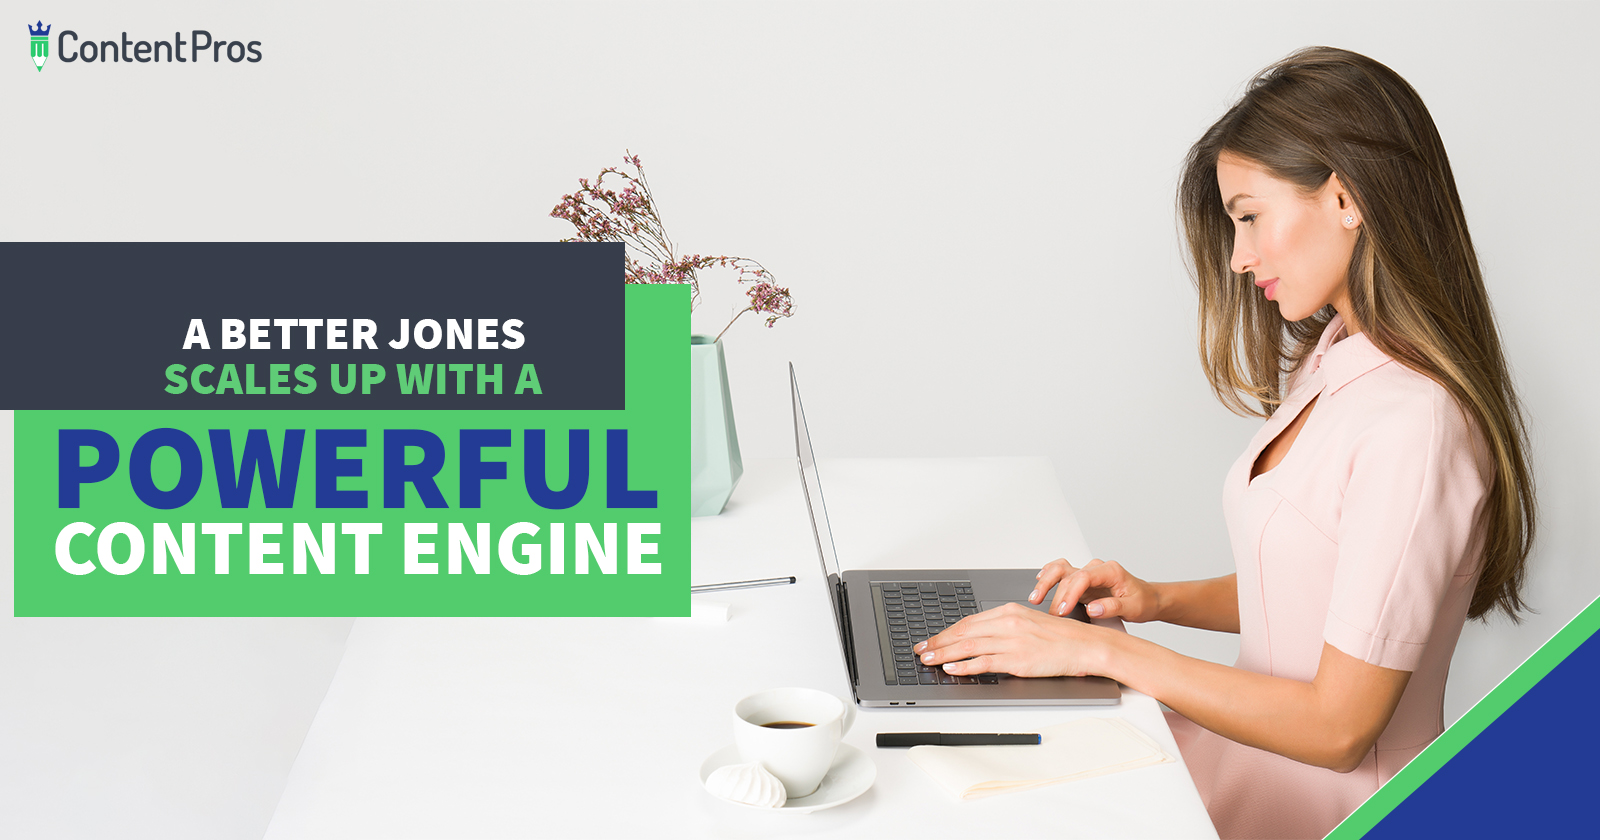 A Better Jones scales up with a powerful content engine